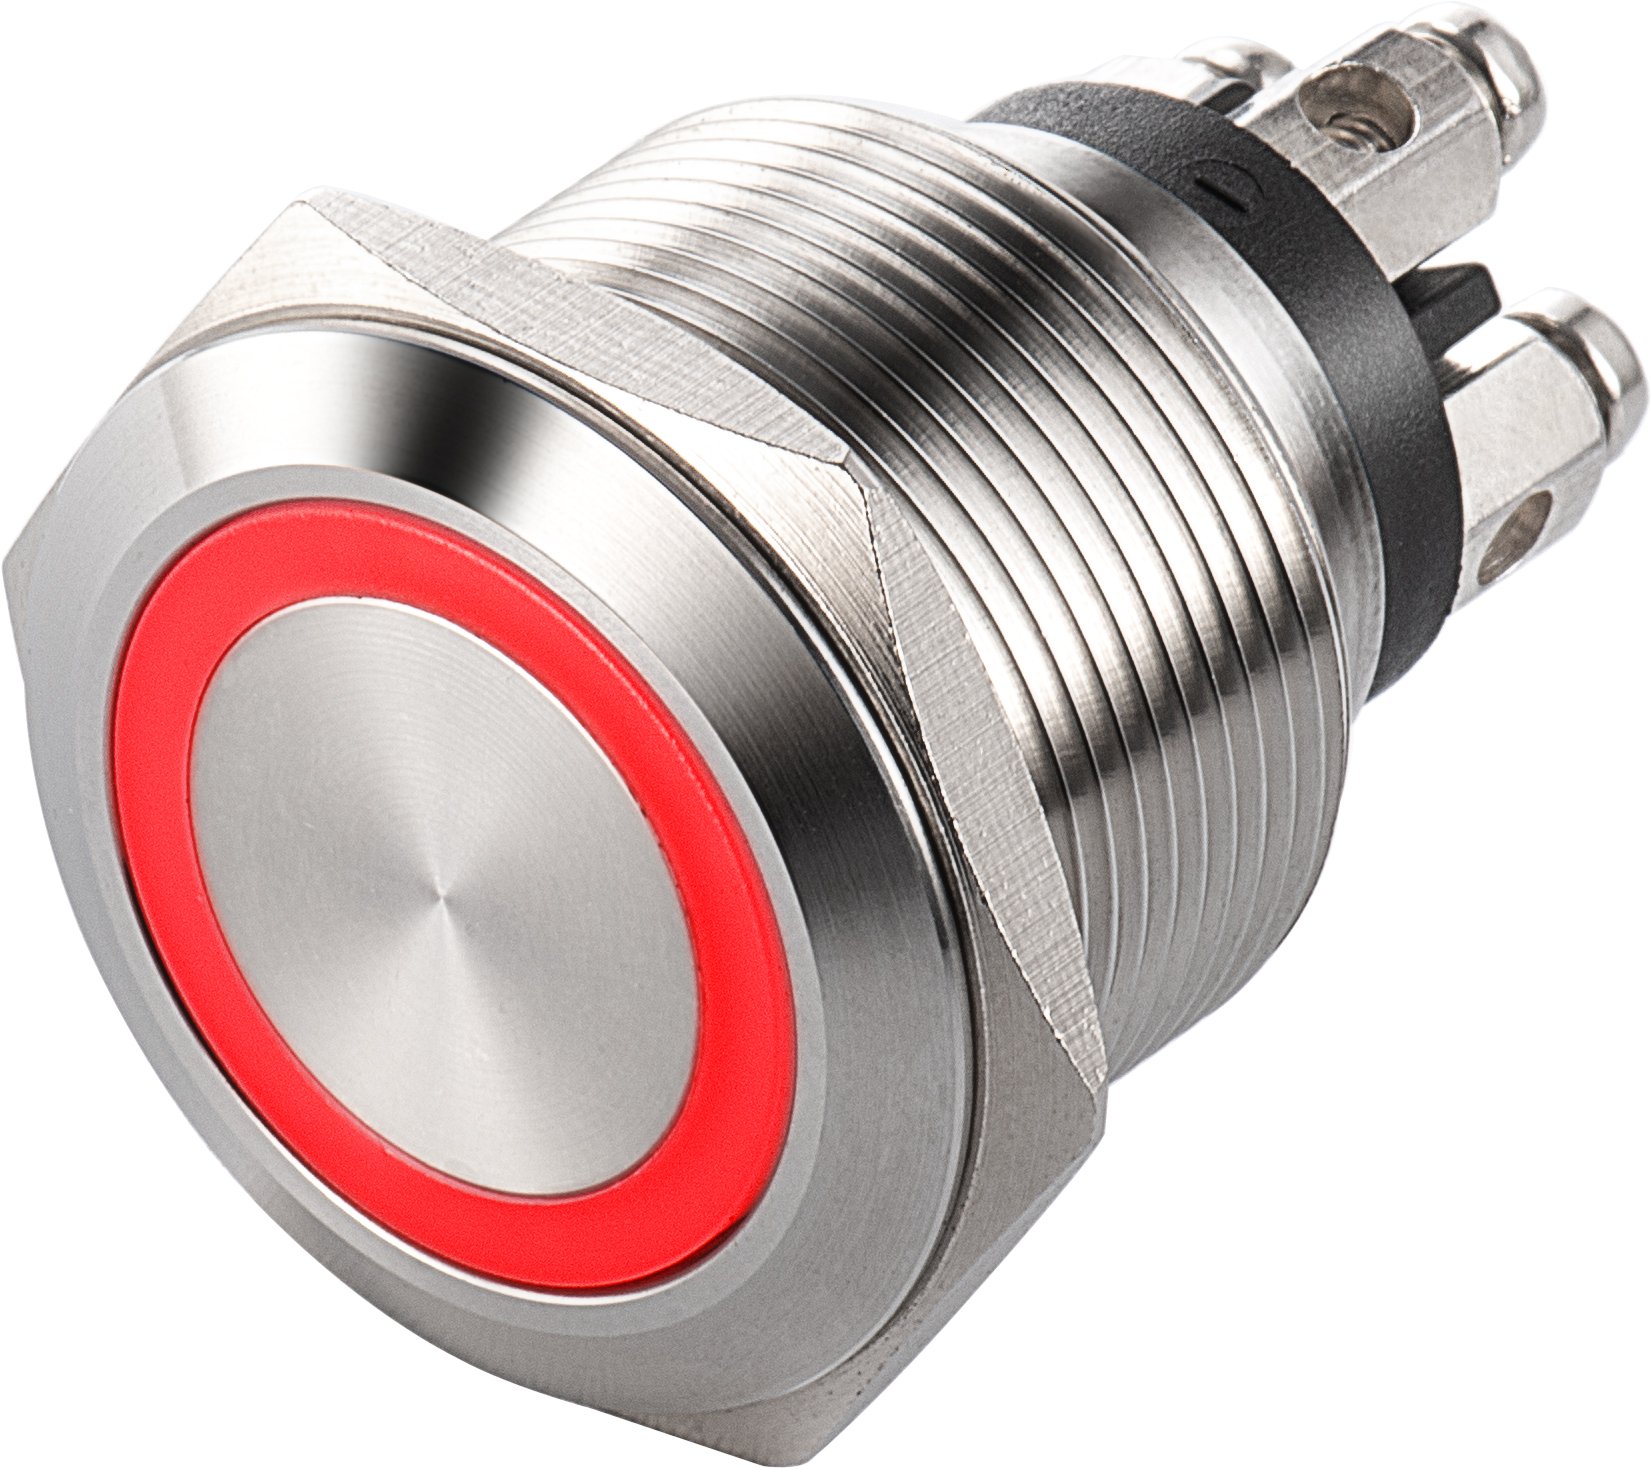 Langir LED push-button L22M M22 with short operating distance and ring LED